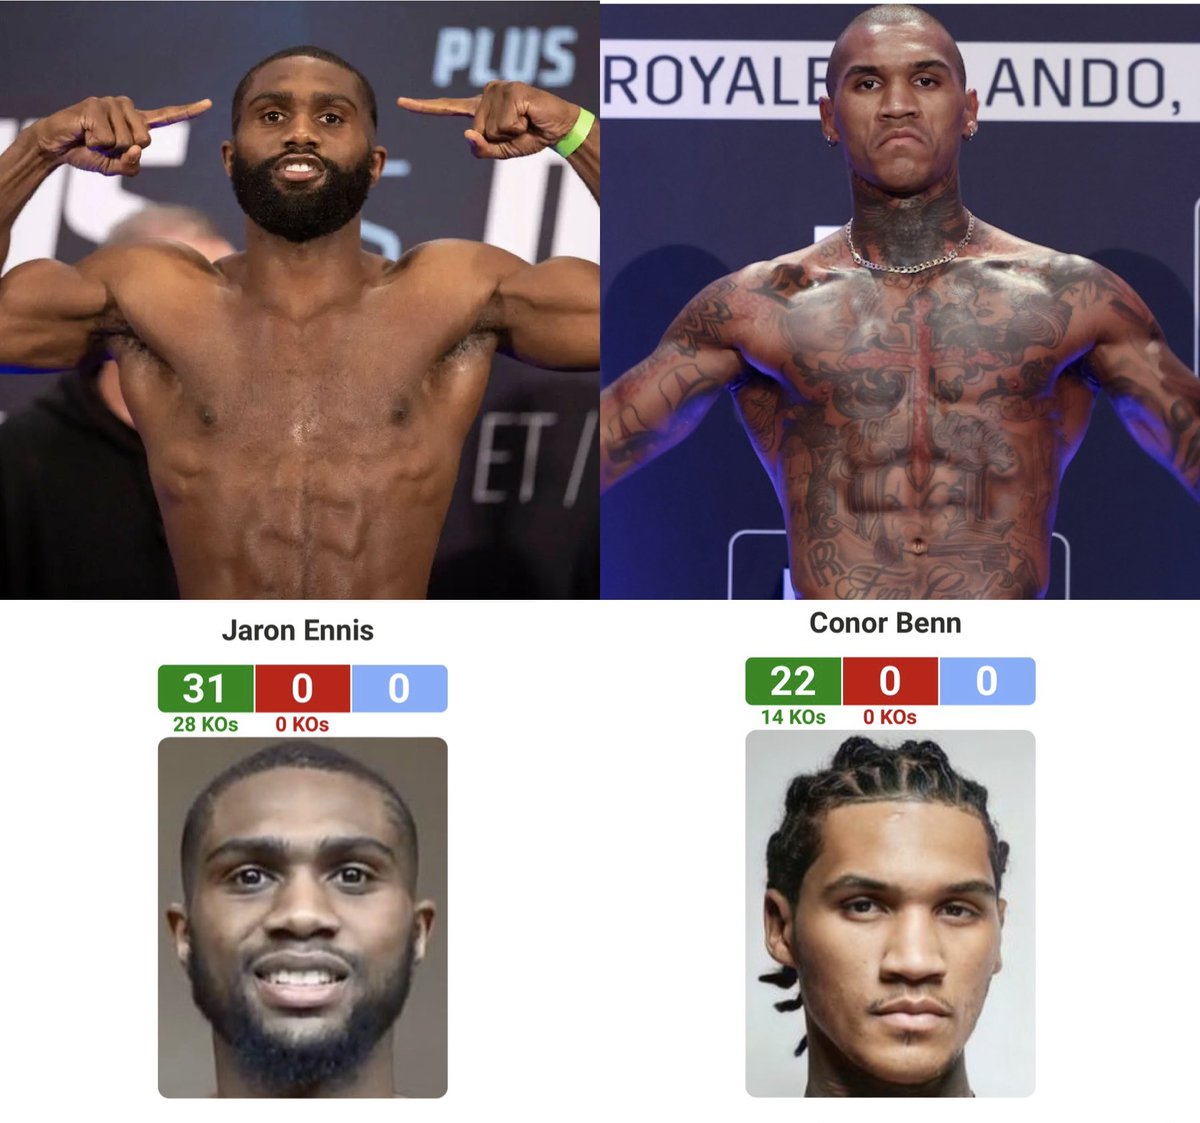 I don’t care what weight.. what network i want to see this fight!! Jaron Boots Ennis vs Conor Benn #boxing #ThrillBoxing #HitchinsZepeda